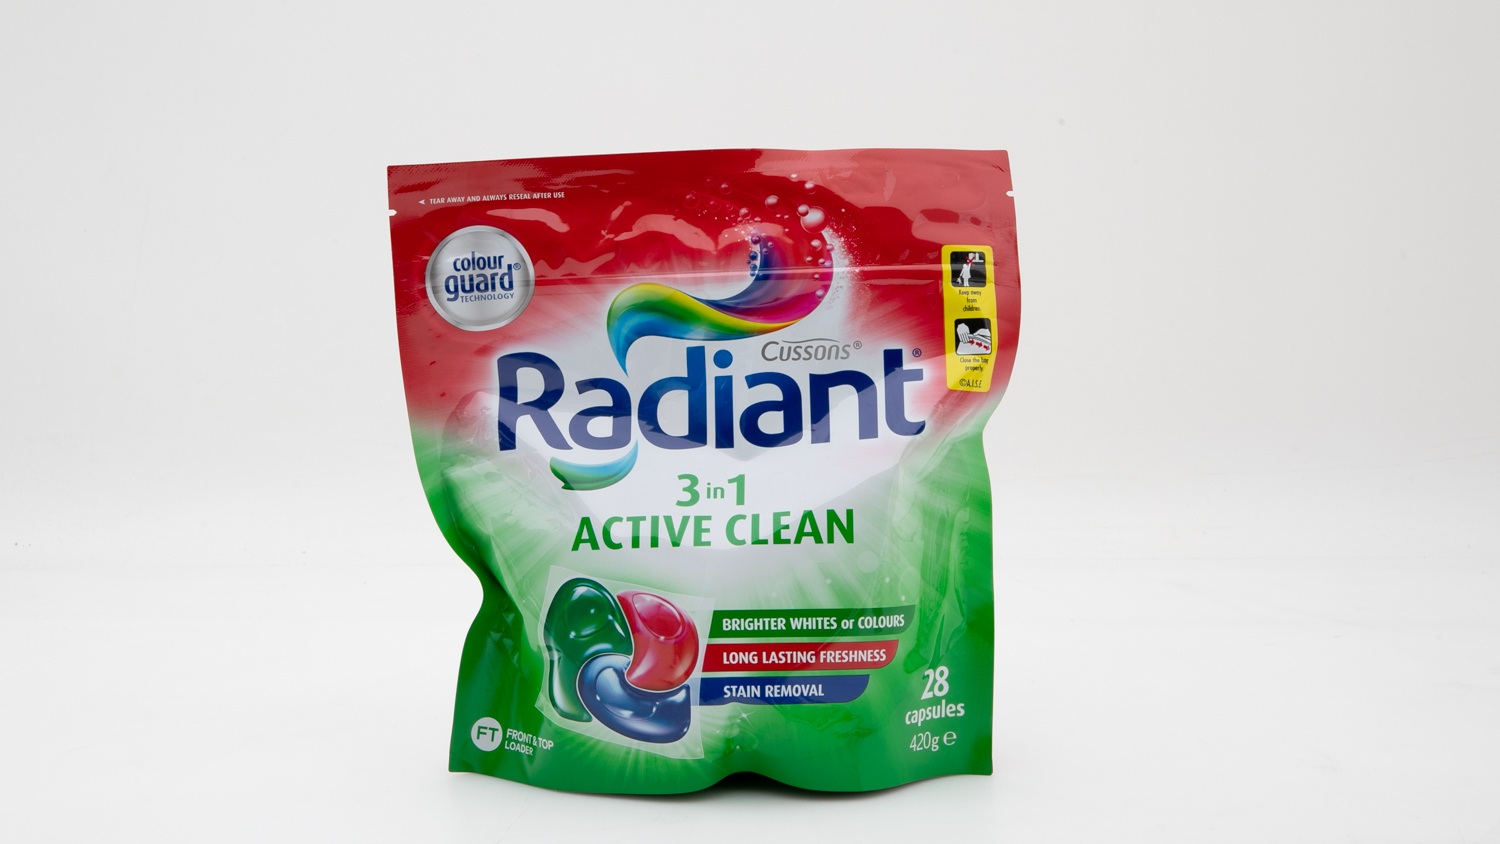 Radiant 3 in 1 Active Clean 28 Capsules 420g Top Loader carousel image